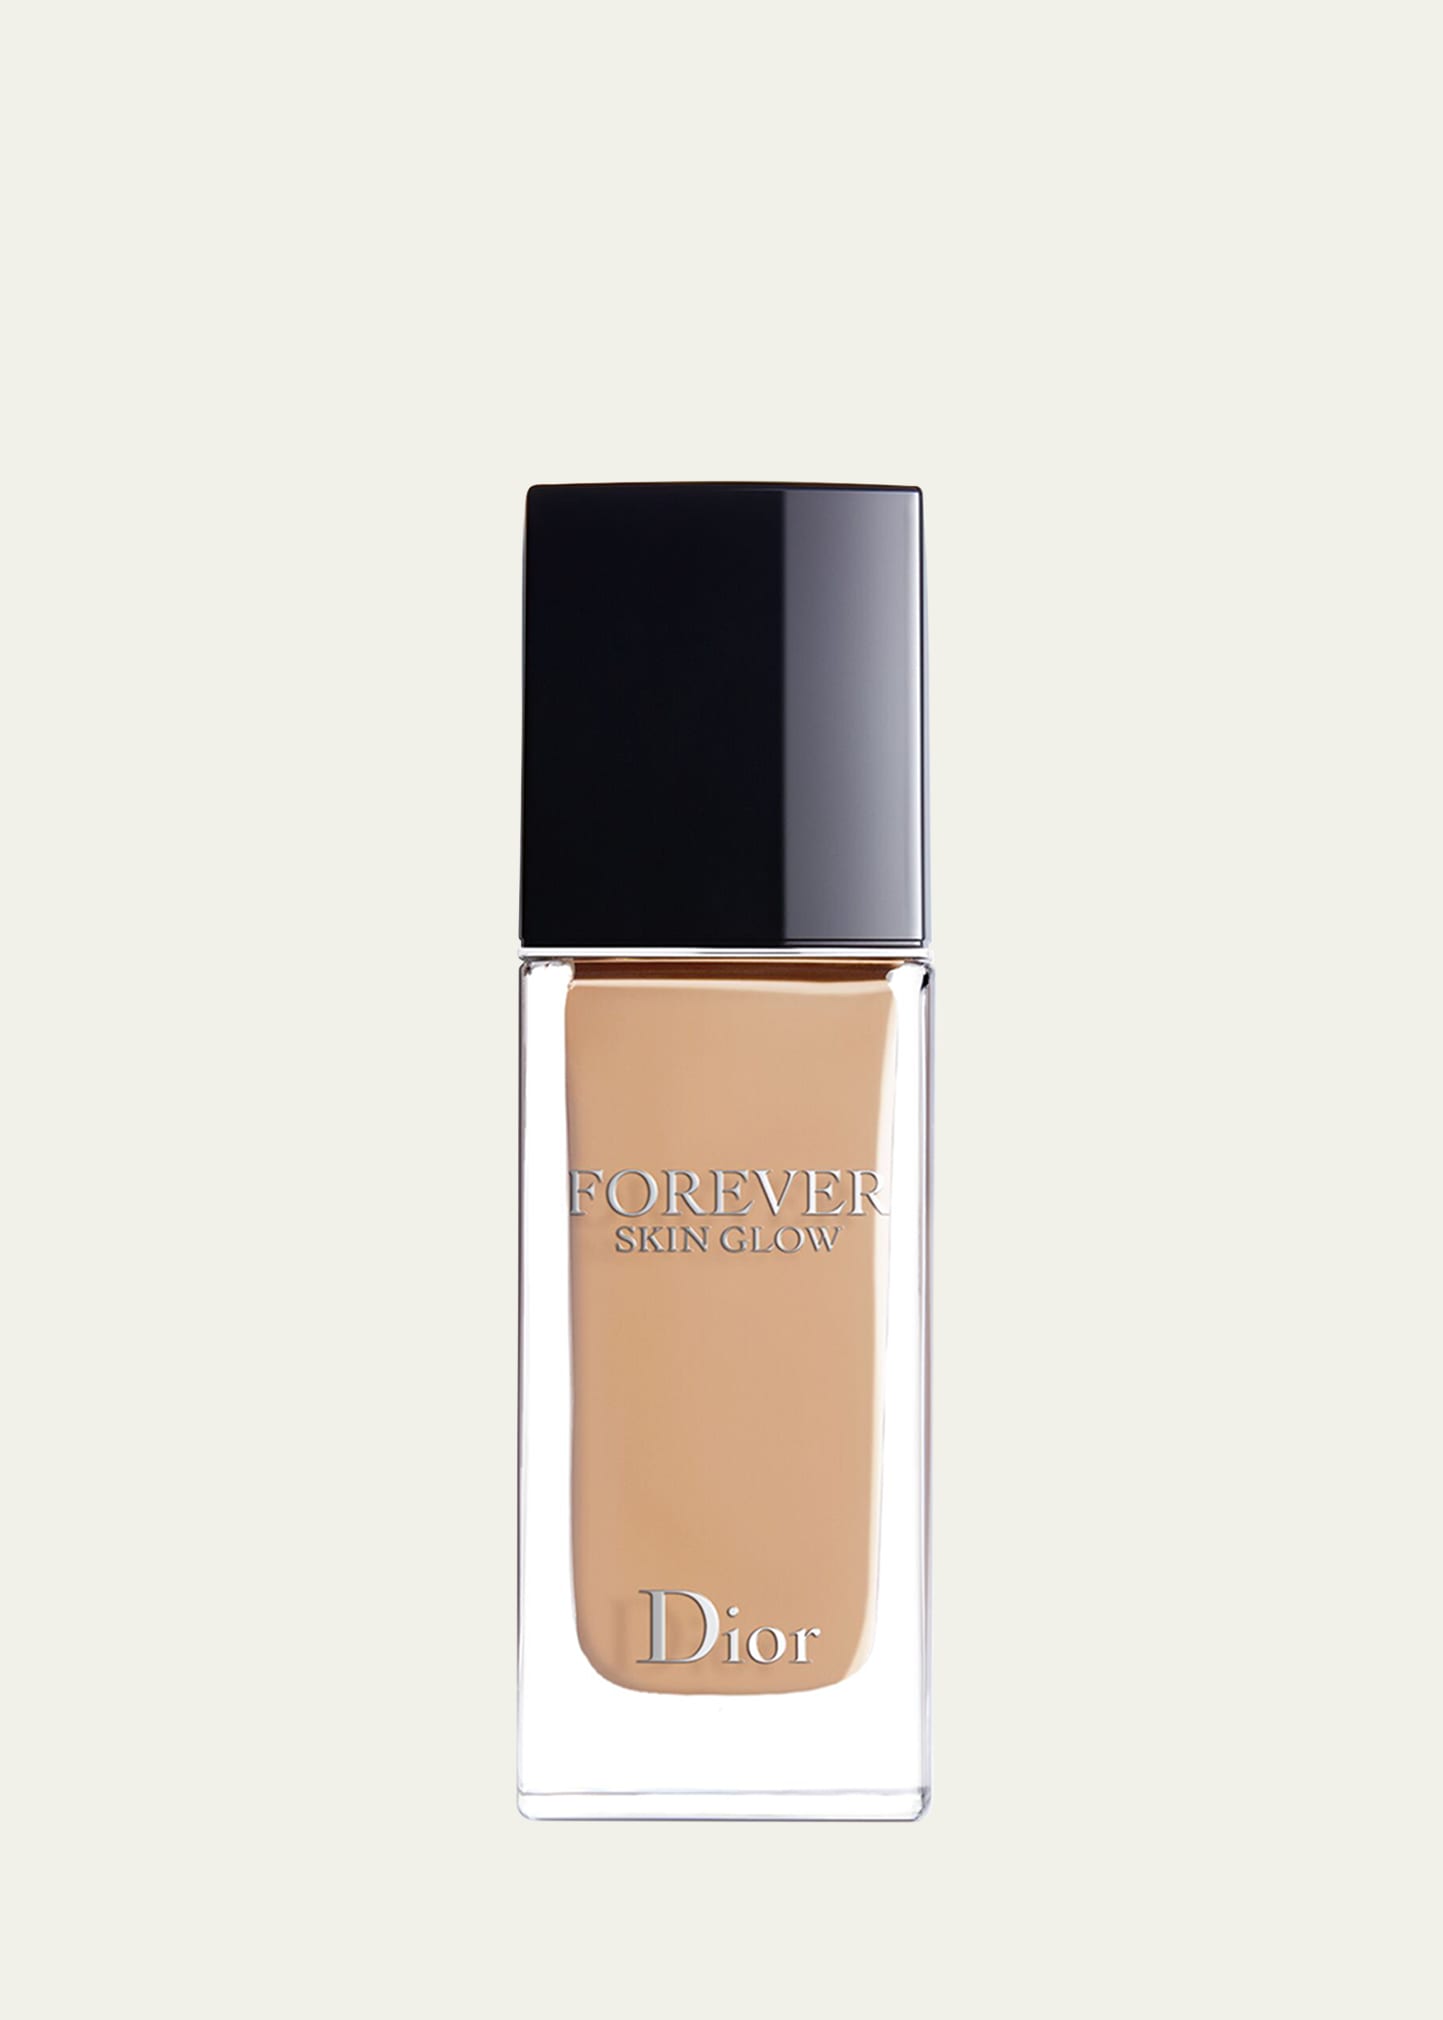 Dior 1 Oz.  Forever Skin Glow Hydrating Foundation Spf 15 In 3 Neutral